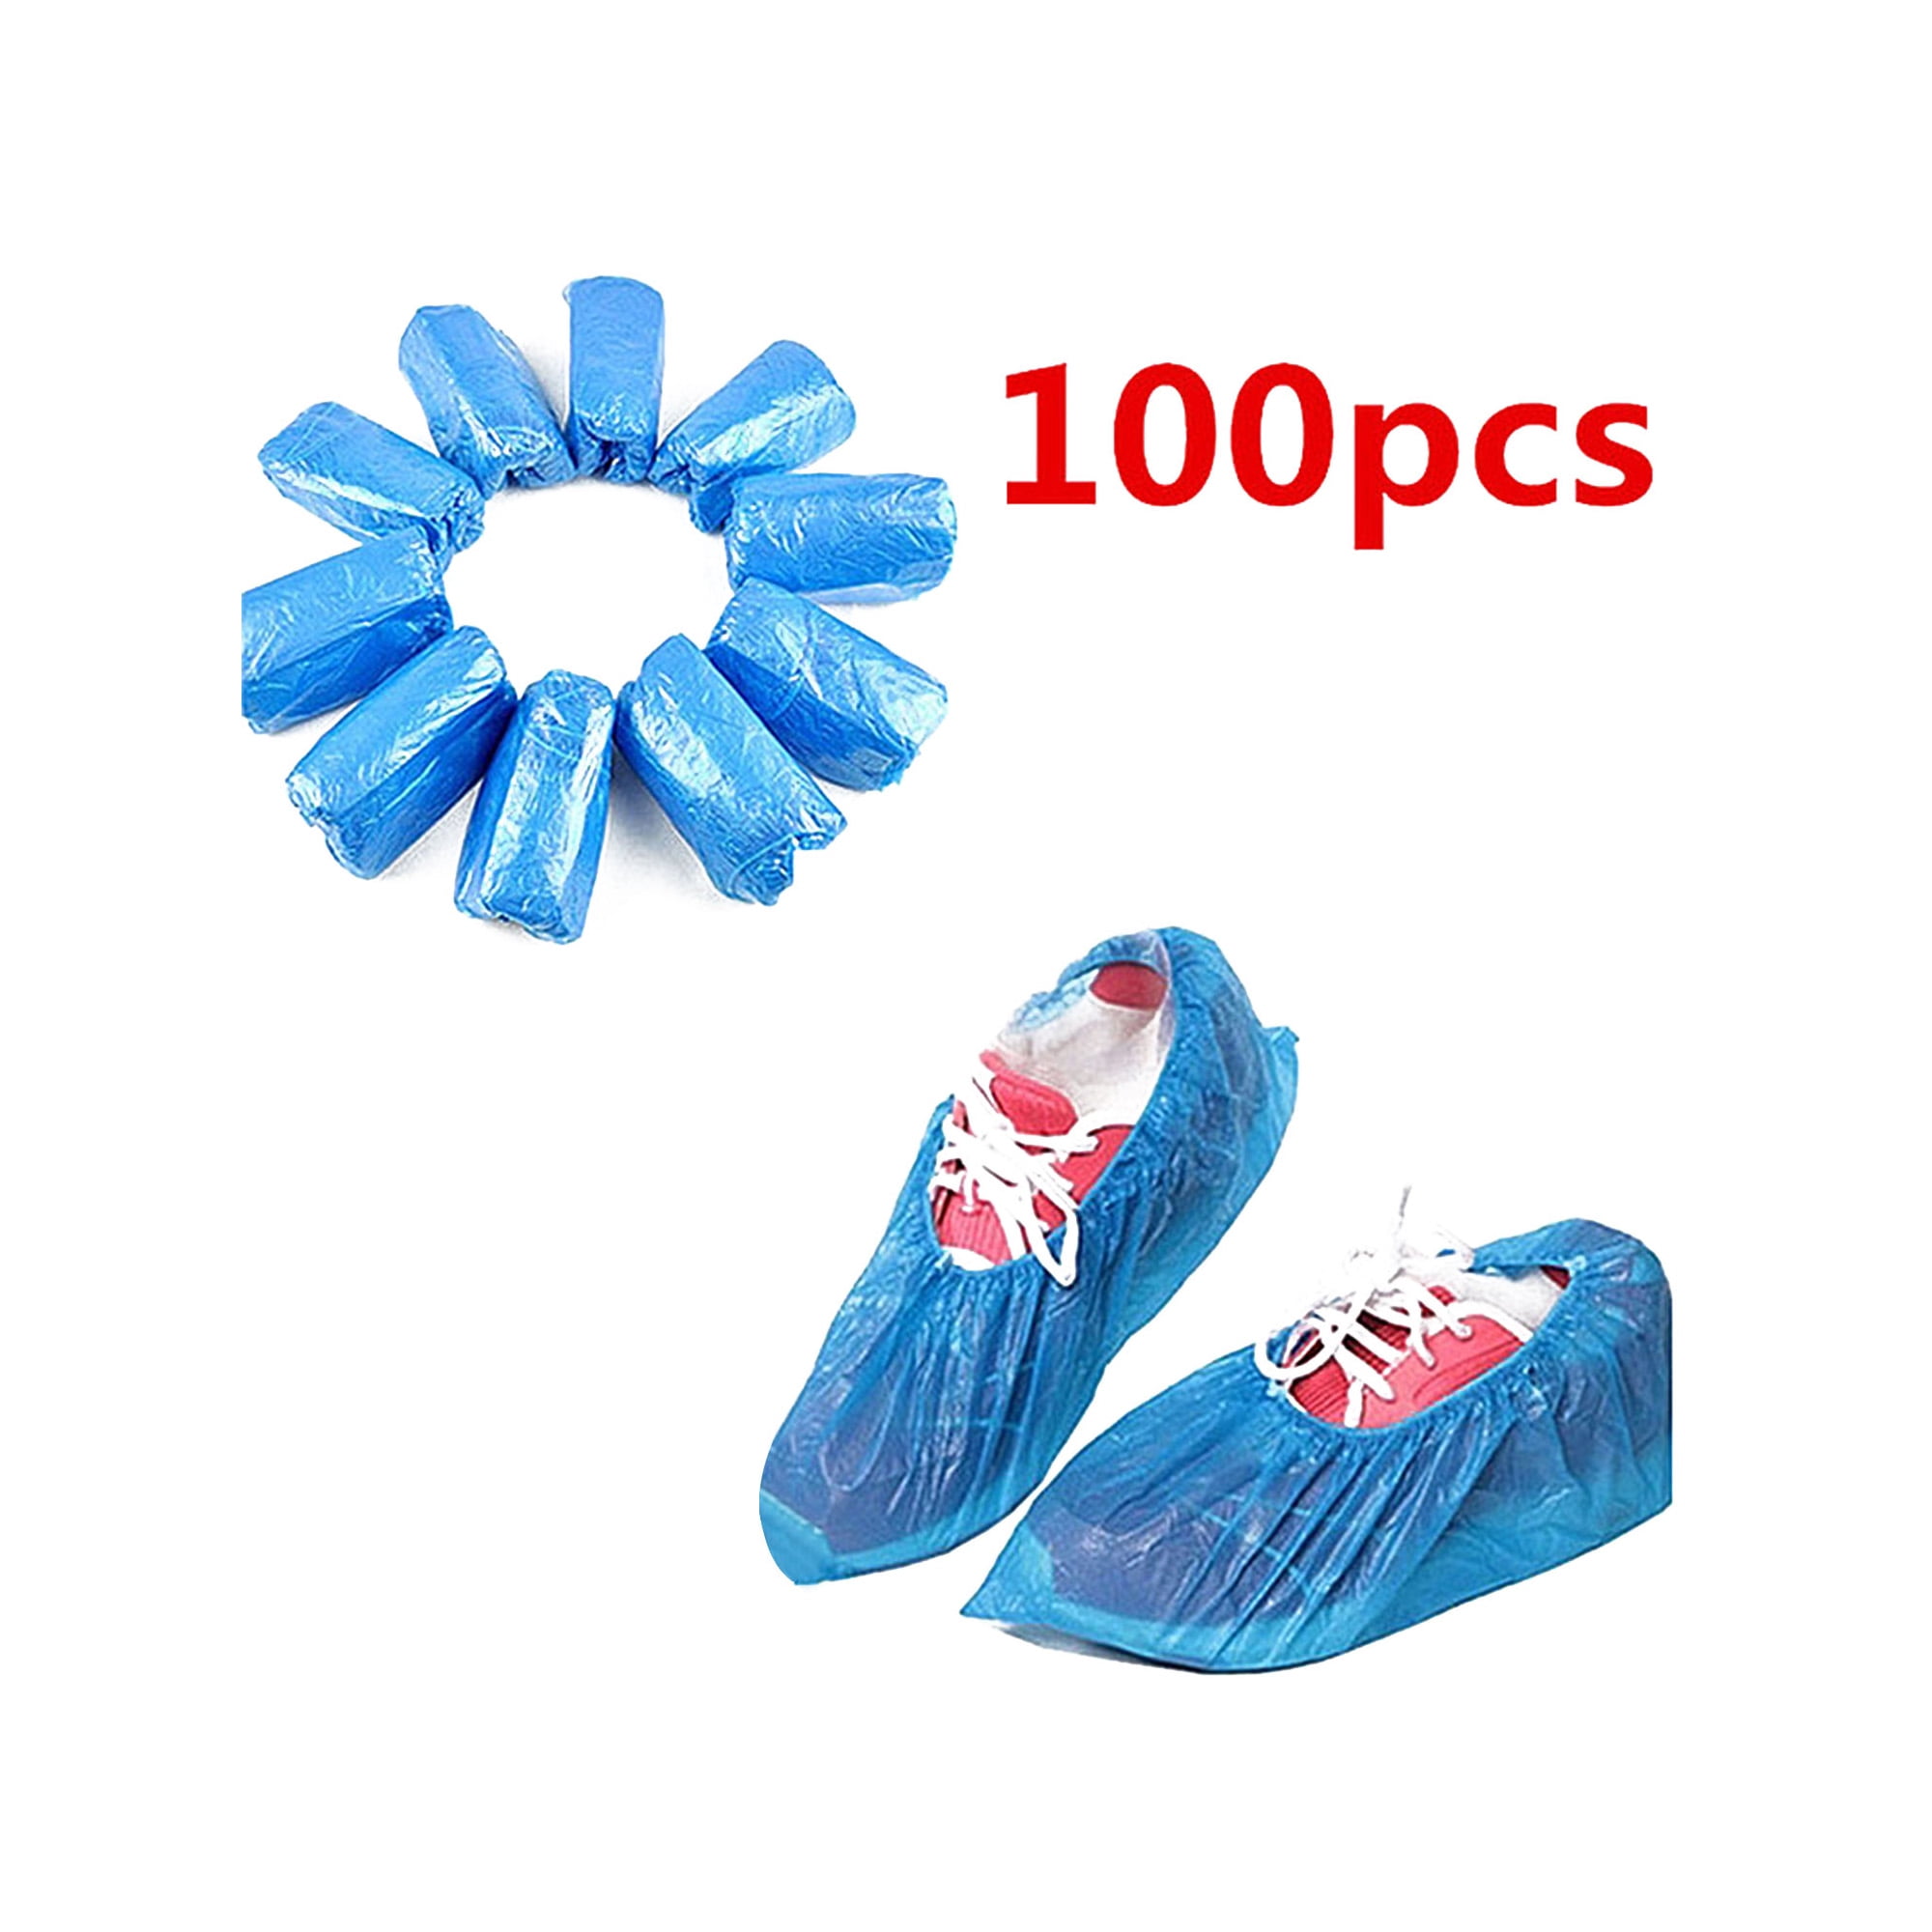 Details about   100PCS Medical Waterproof Anti Slip Boot Covers Plastic Disposable Shoe Covers 